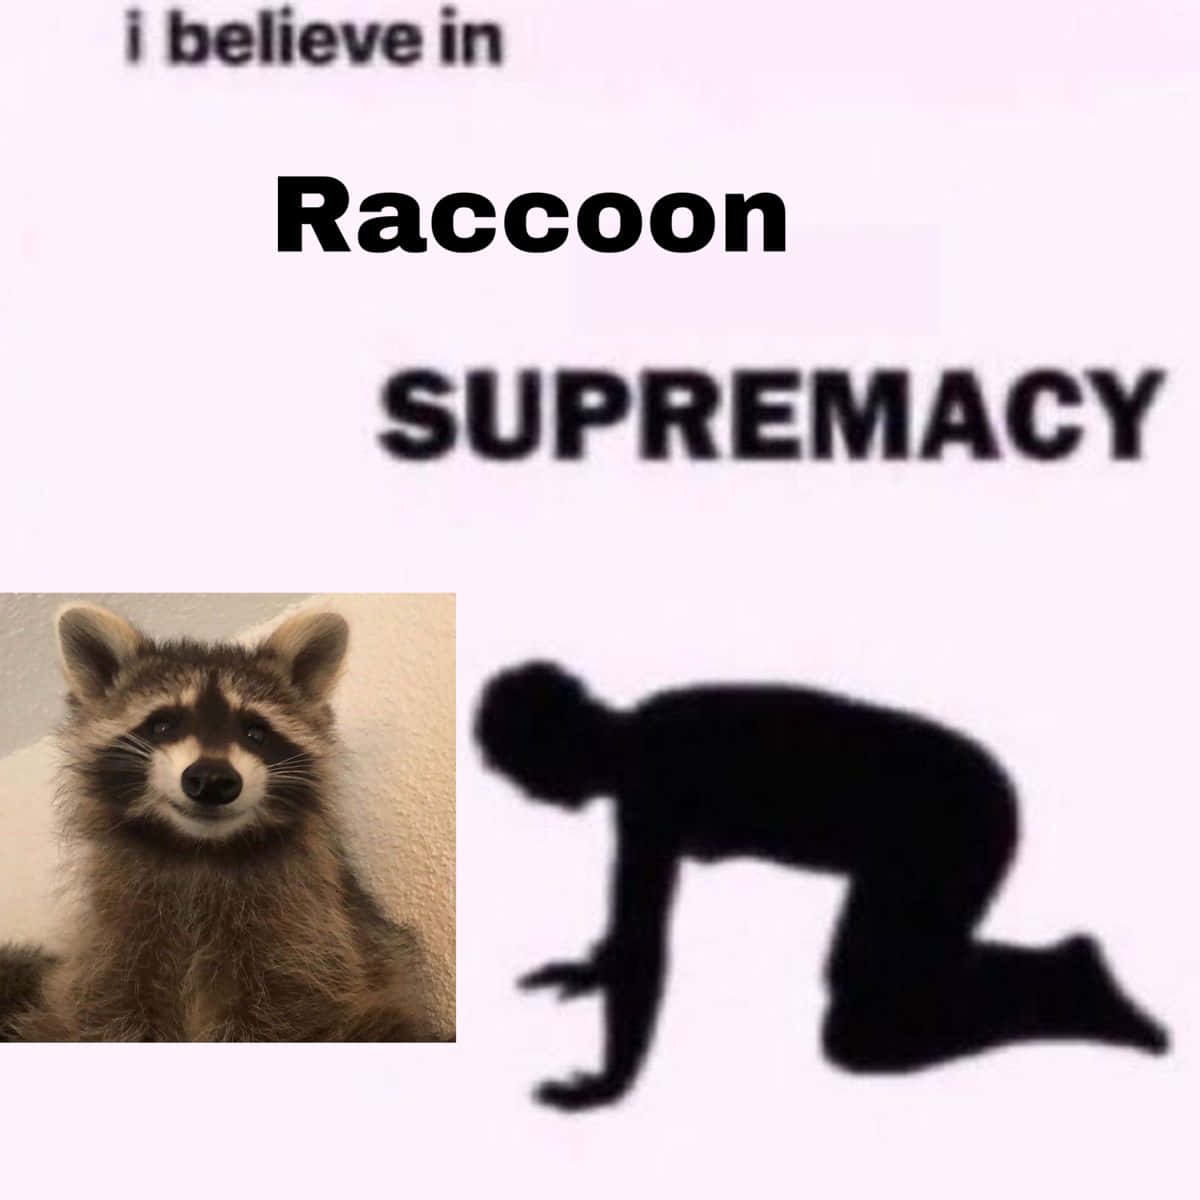 Funny Raccoon Supremacy Bow Down Meme Picture